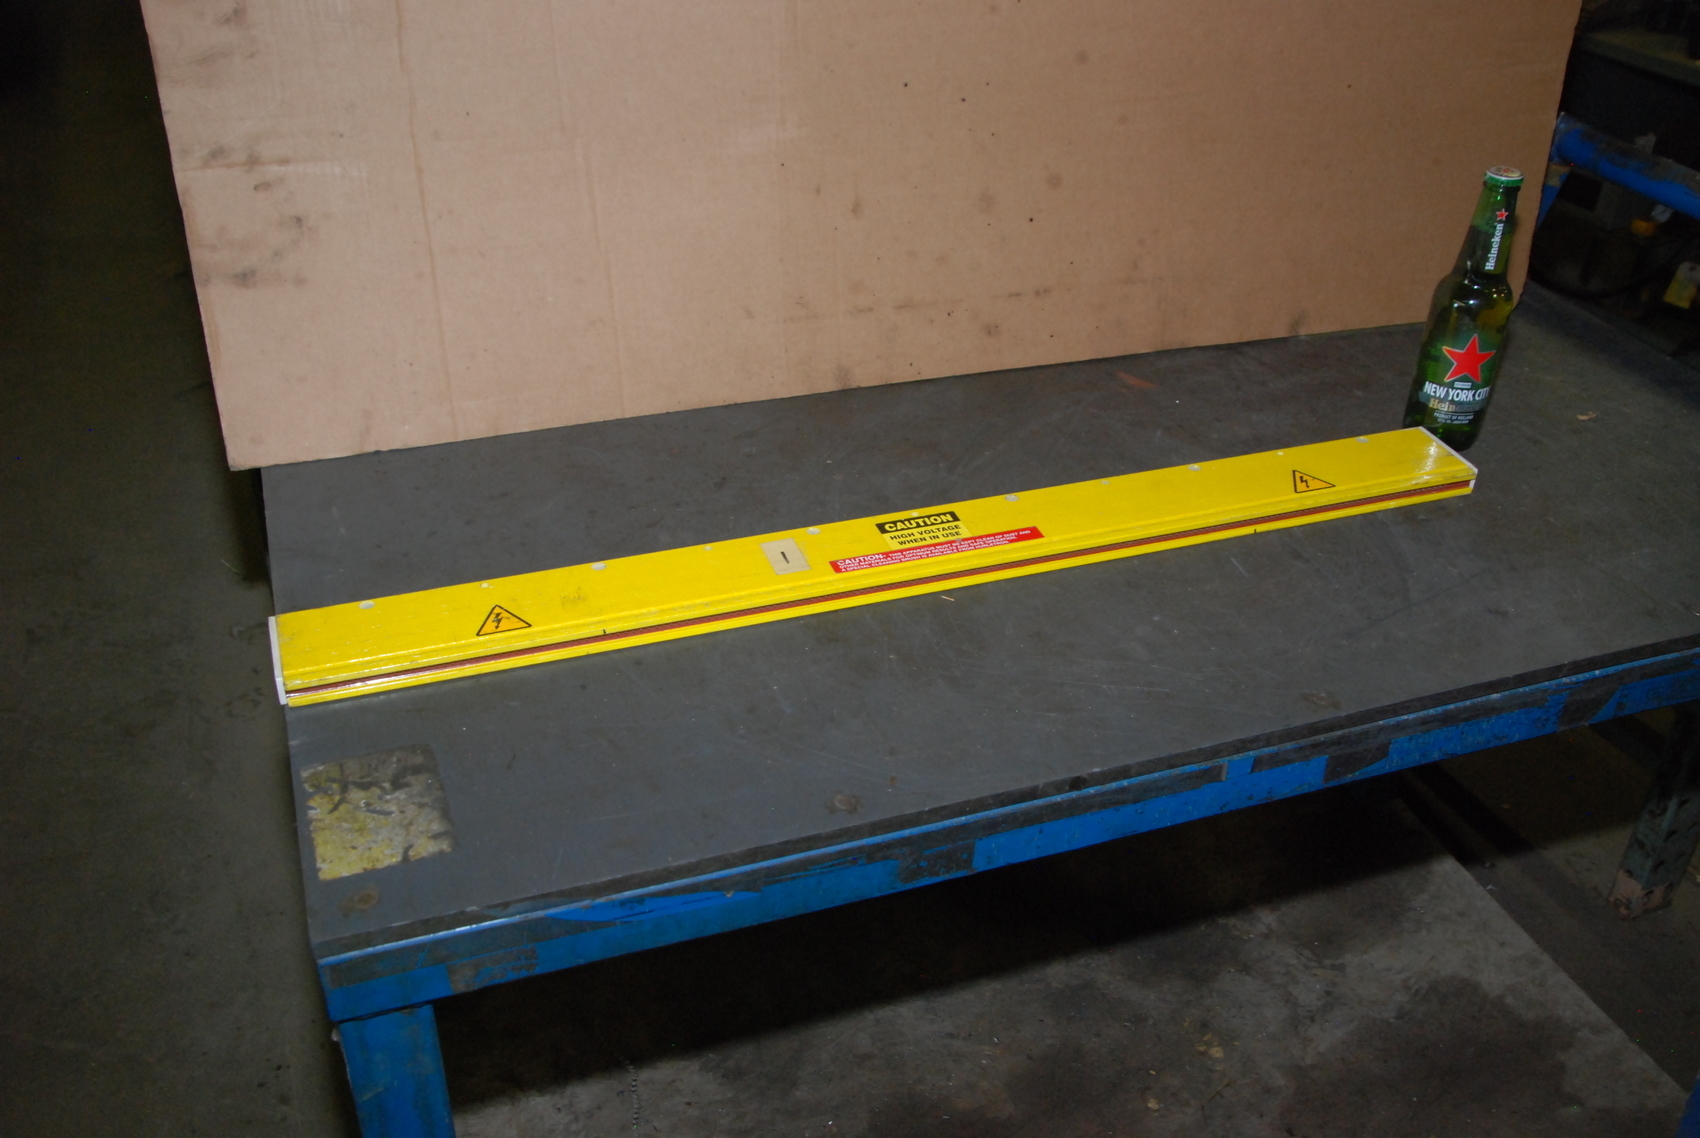 Hurletron High Voltage Charge Bar;len-34-3/4";width-3/4;height 3-1/8"